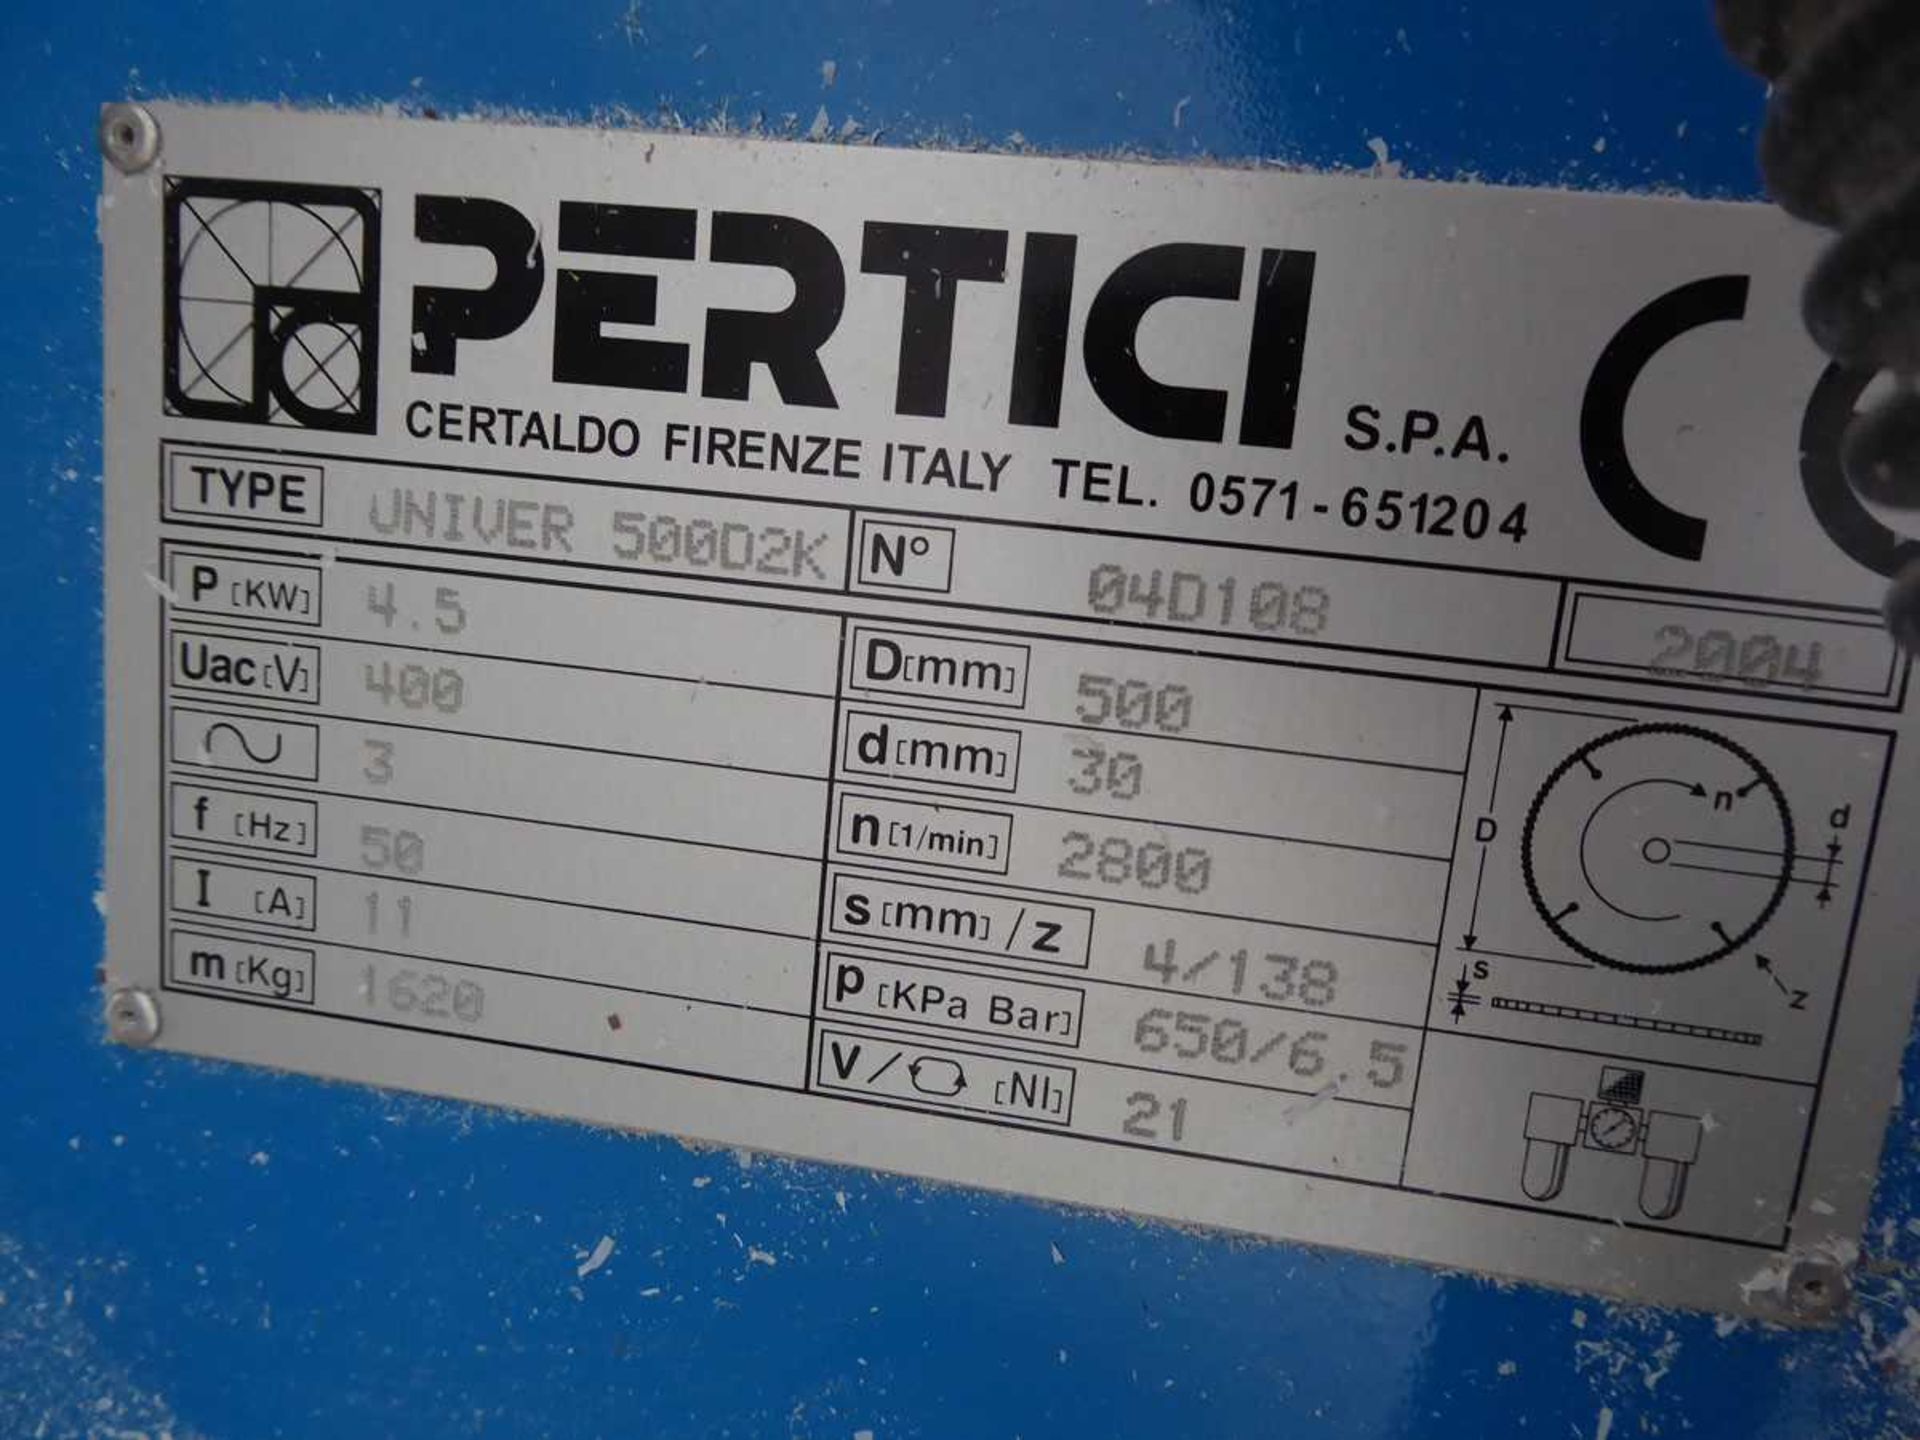 Pertici Univer 500D2K double head PVCu saw, year approx 2004 - Image 9 of 10